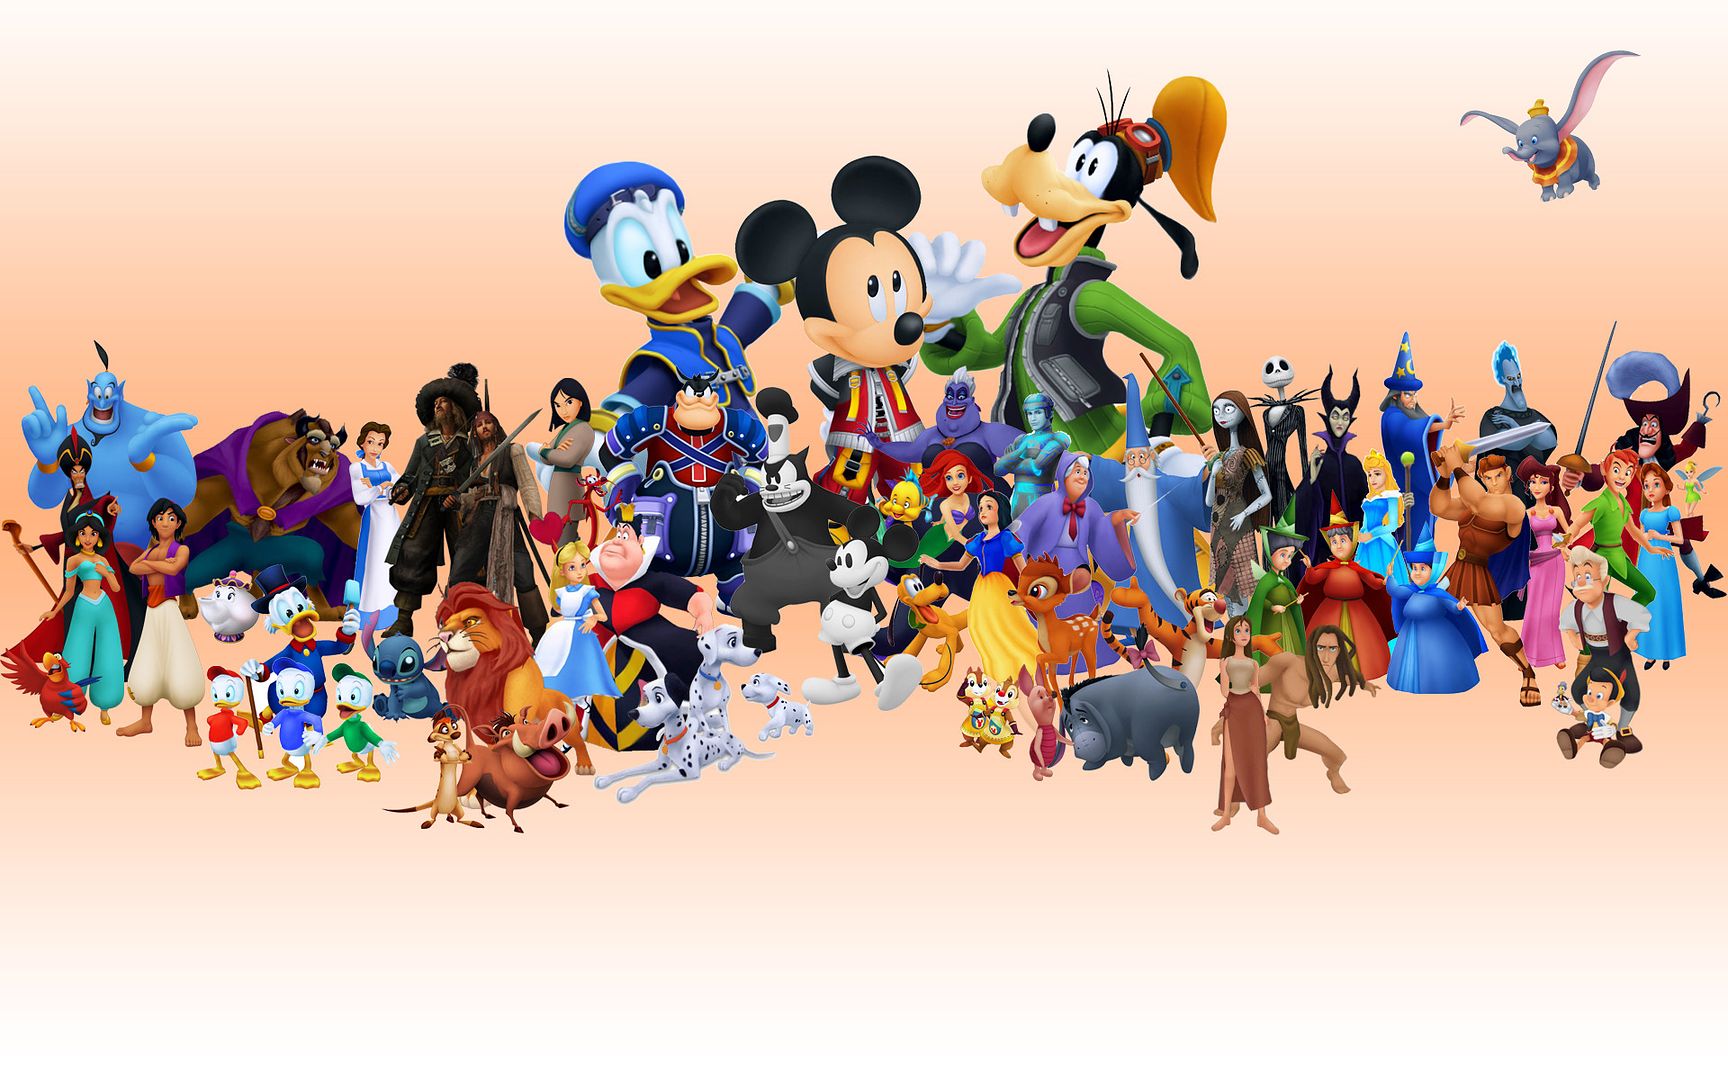 092109 t7disney obs07 - Disney Classic Games Collection